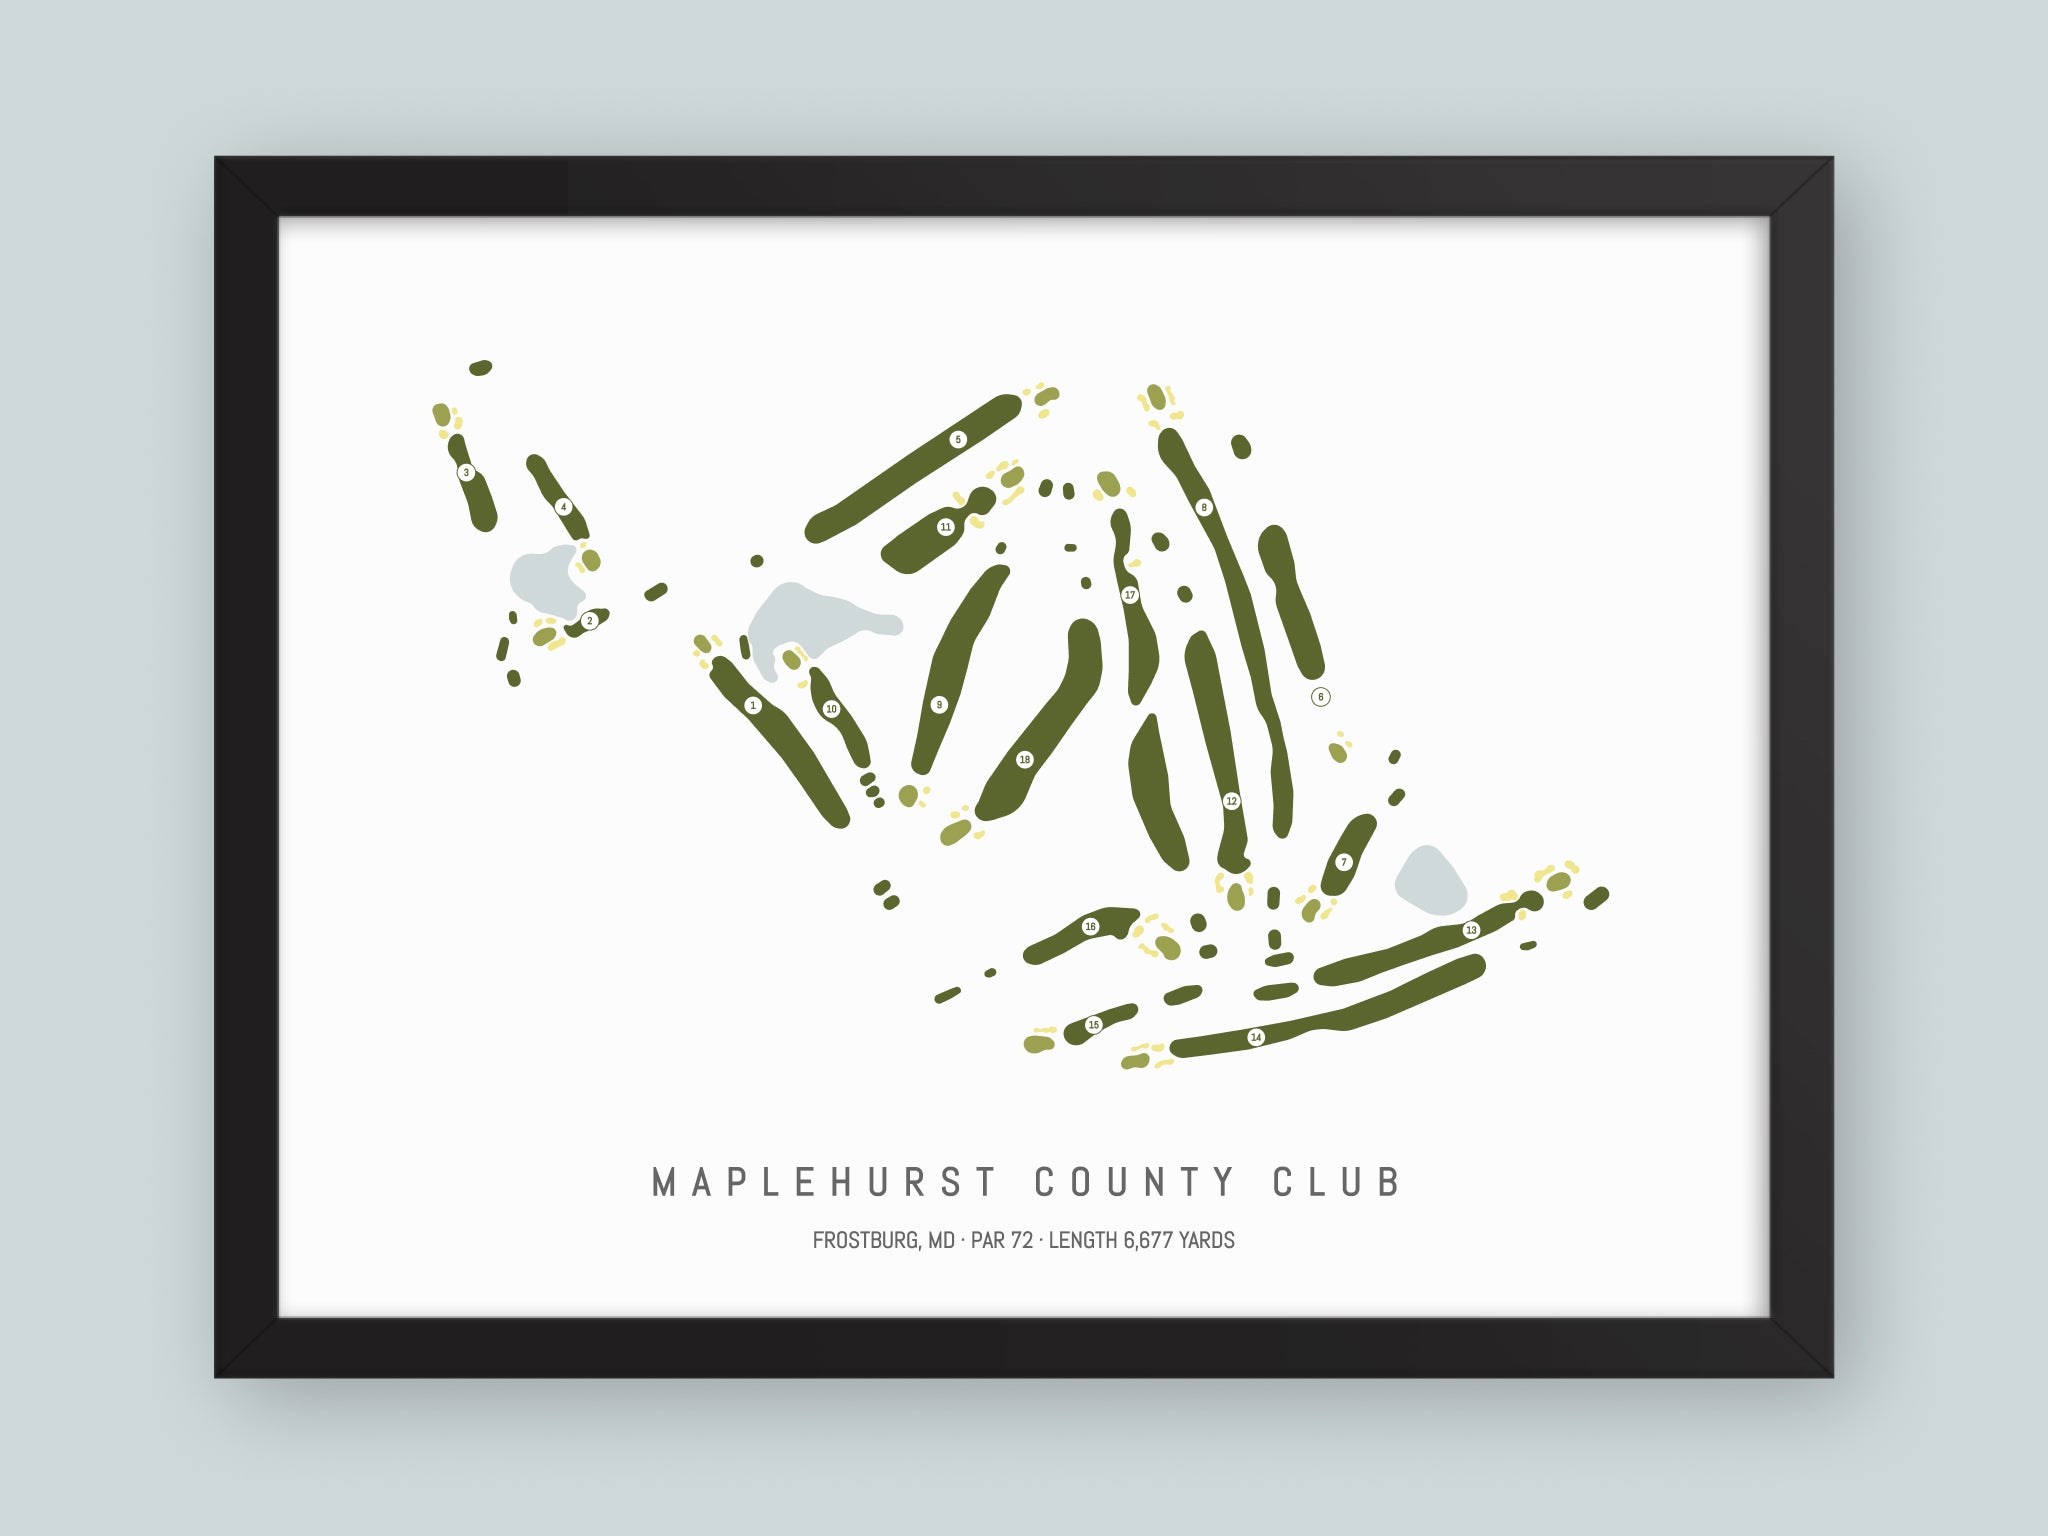 Maplehurst-County-Club-MD--Black-Frame-24x18-With-Hole-Numbers